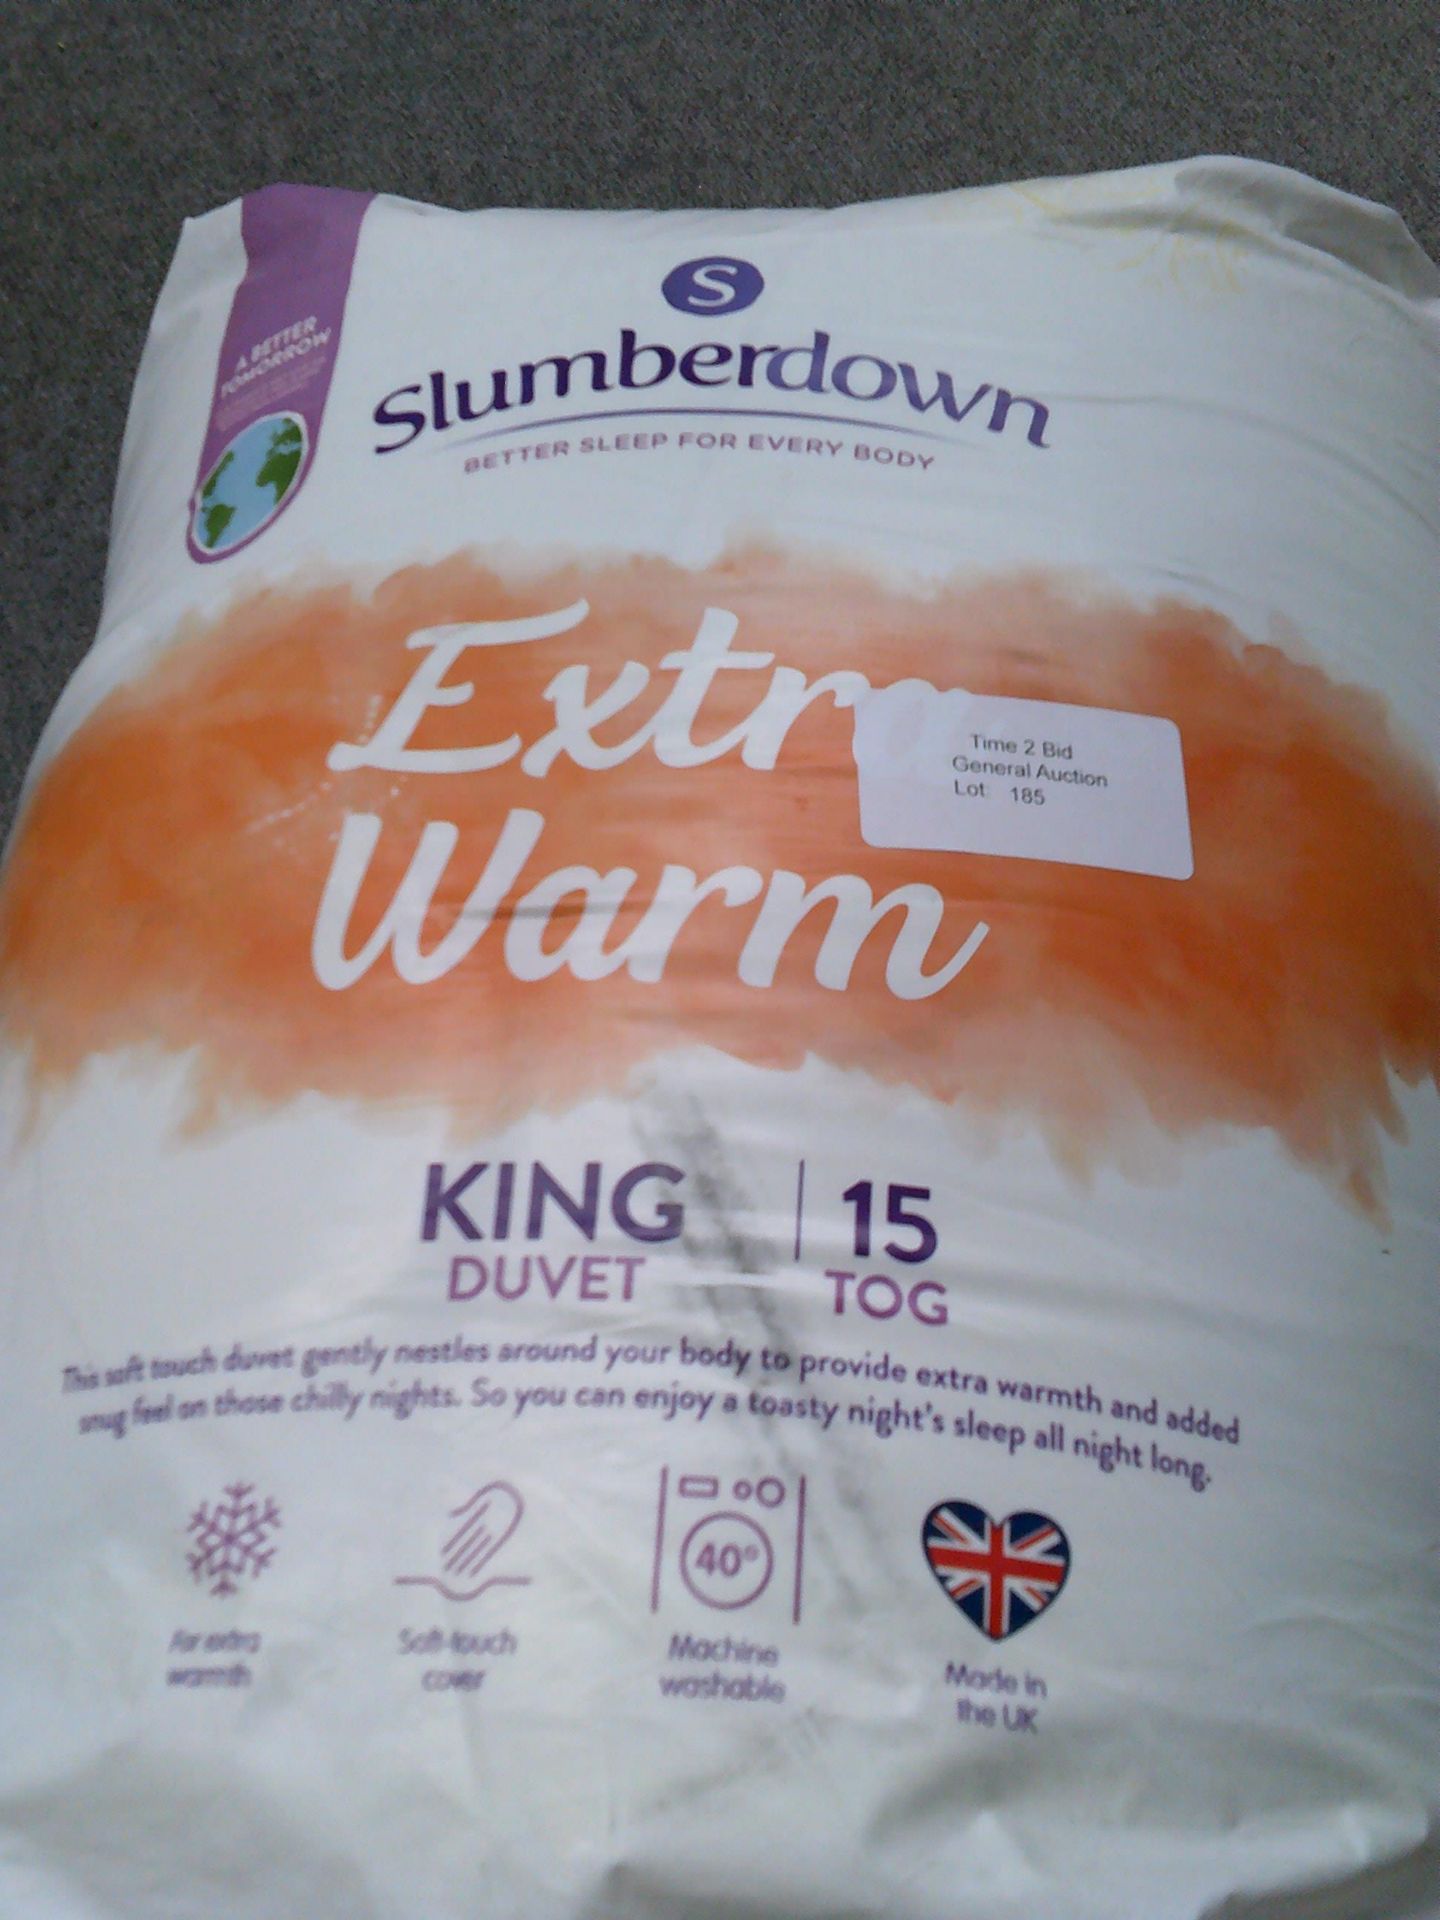 Slumberdown extra warm king duvet 15 tog (Delivery Band A)